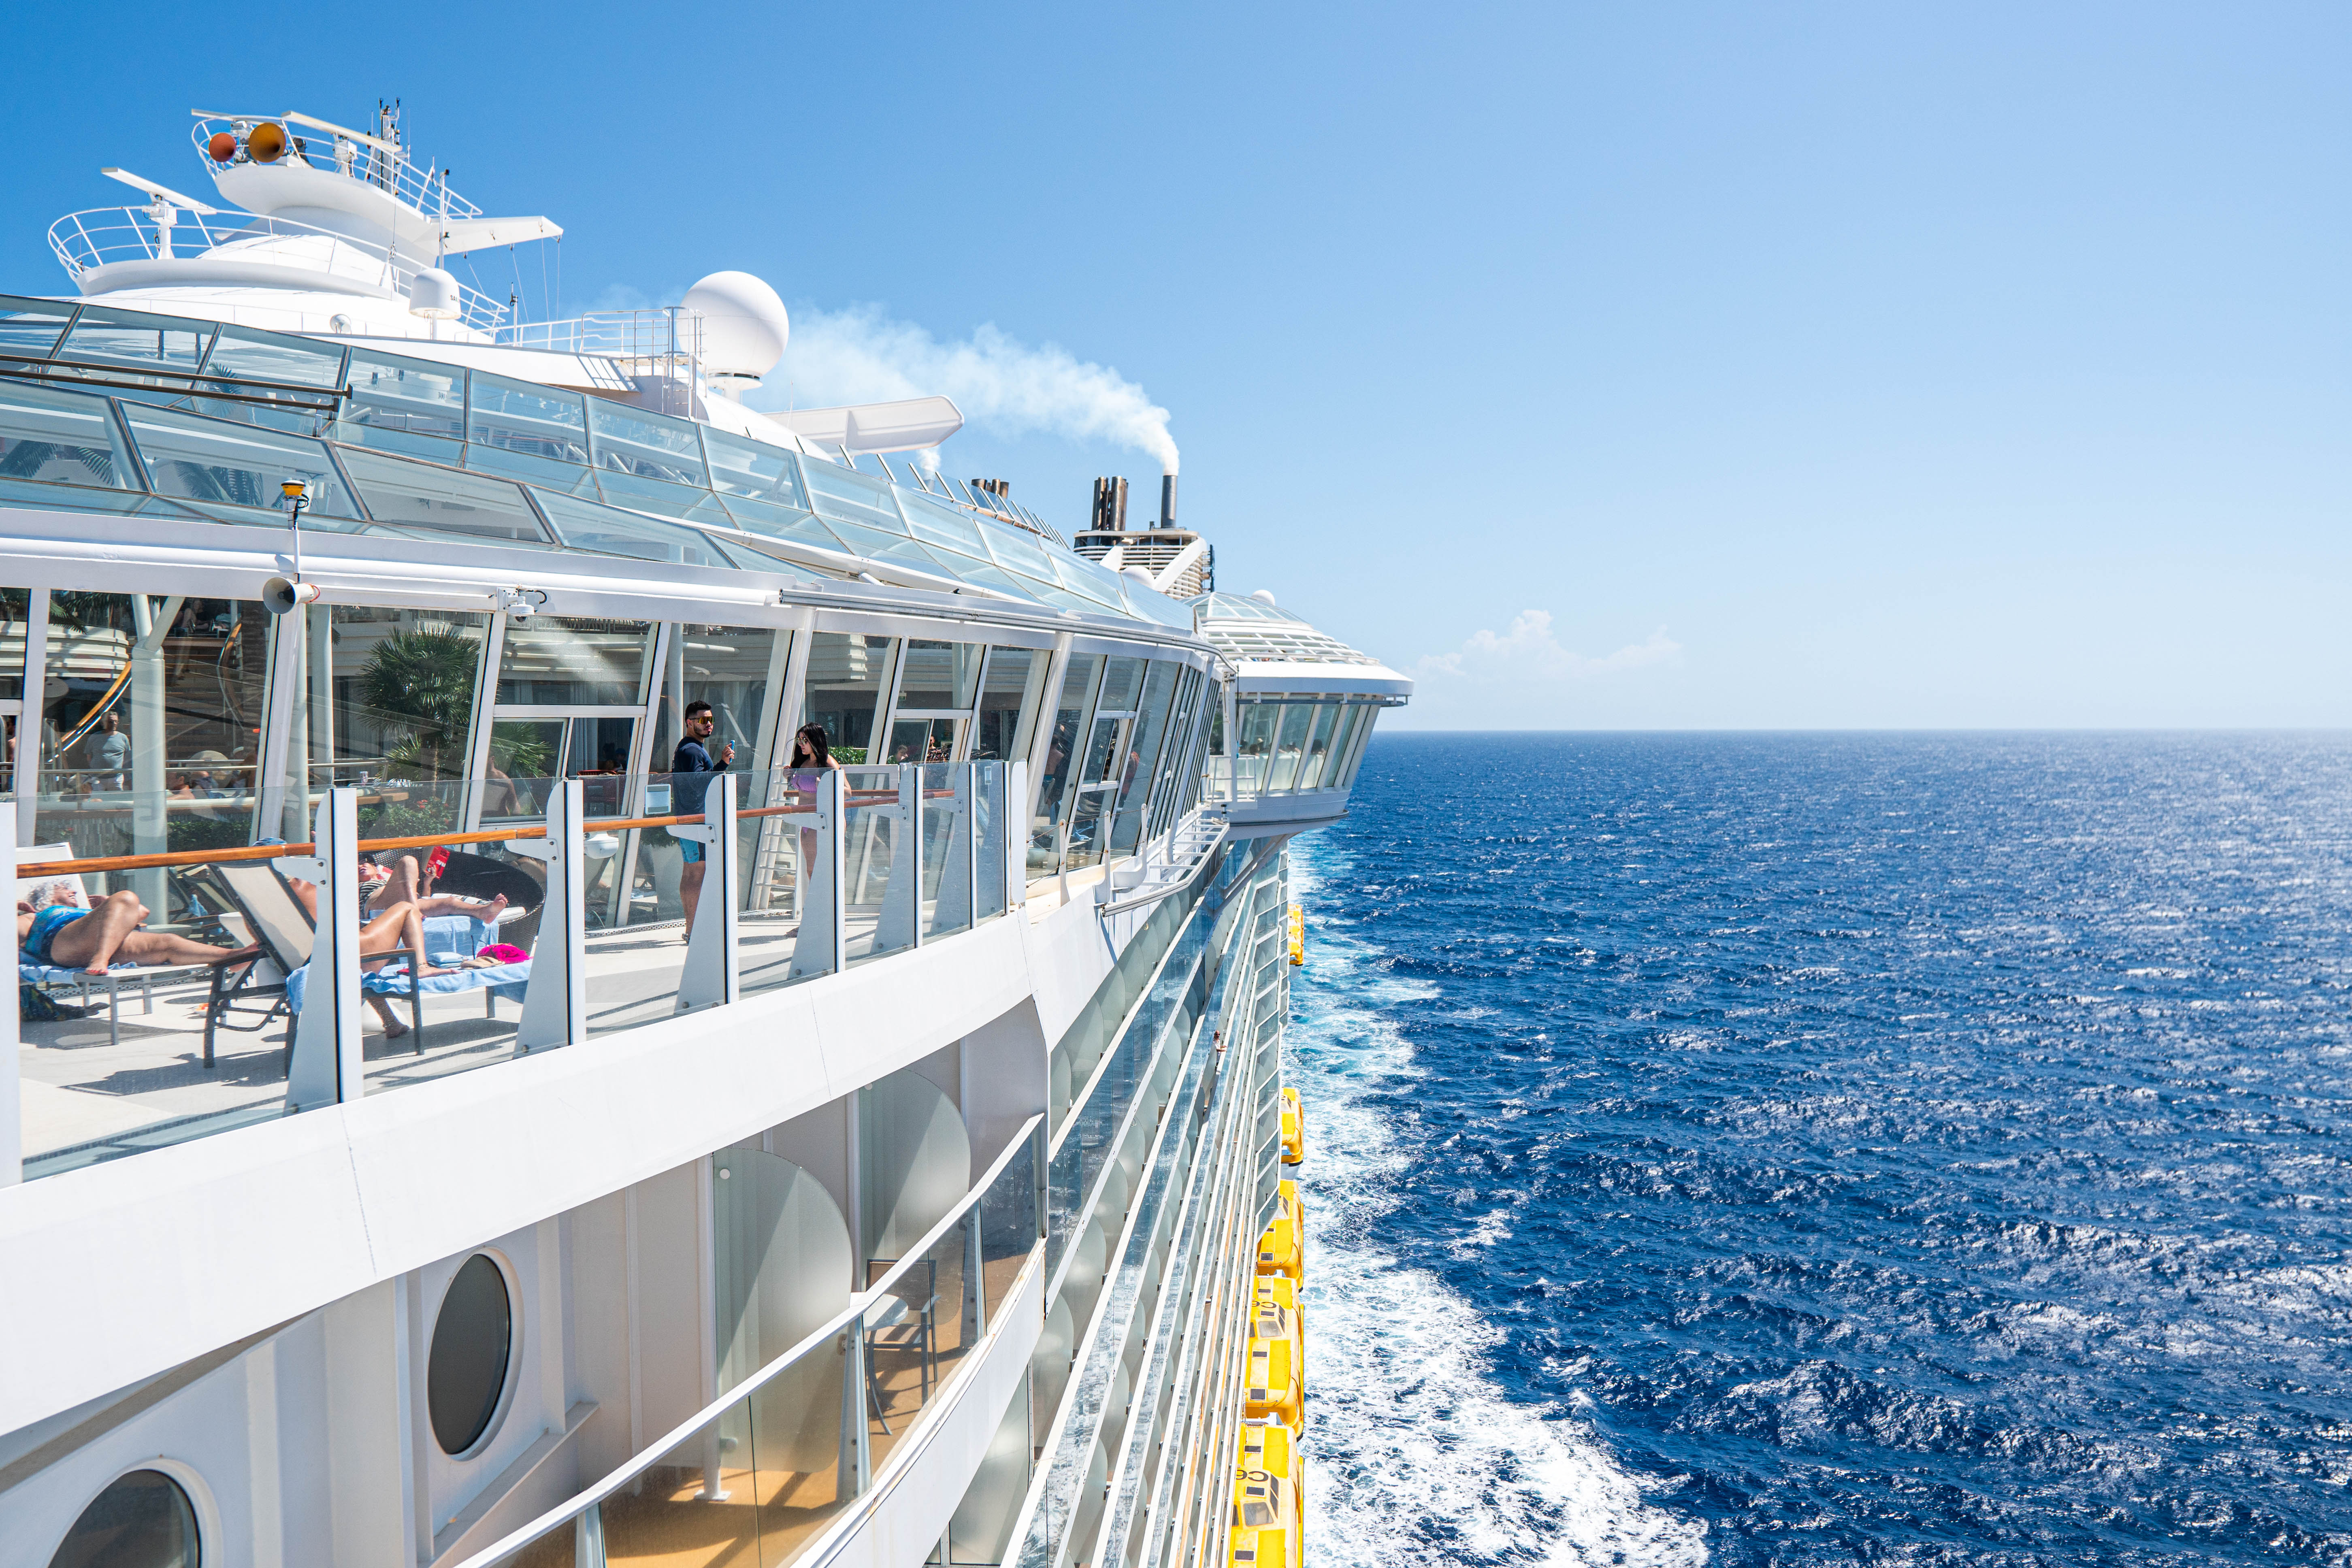 Episode 502 - Ways to do things differently on your next cruise